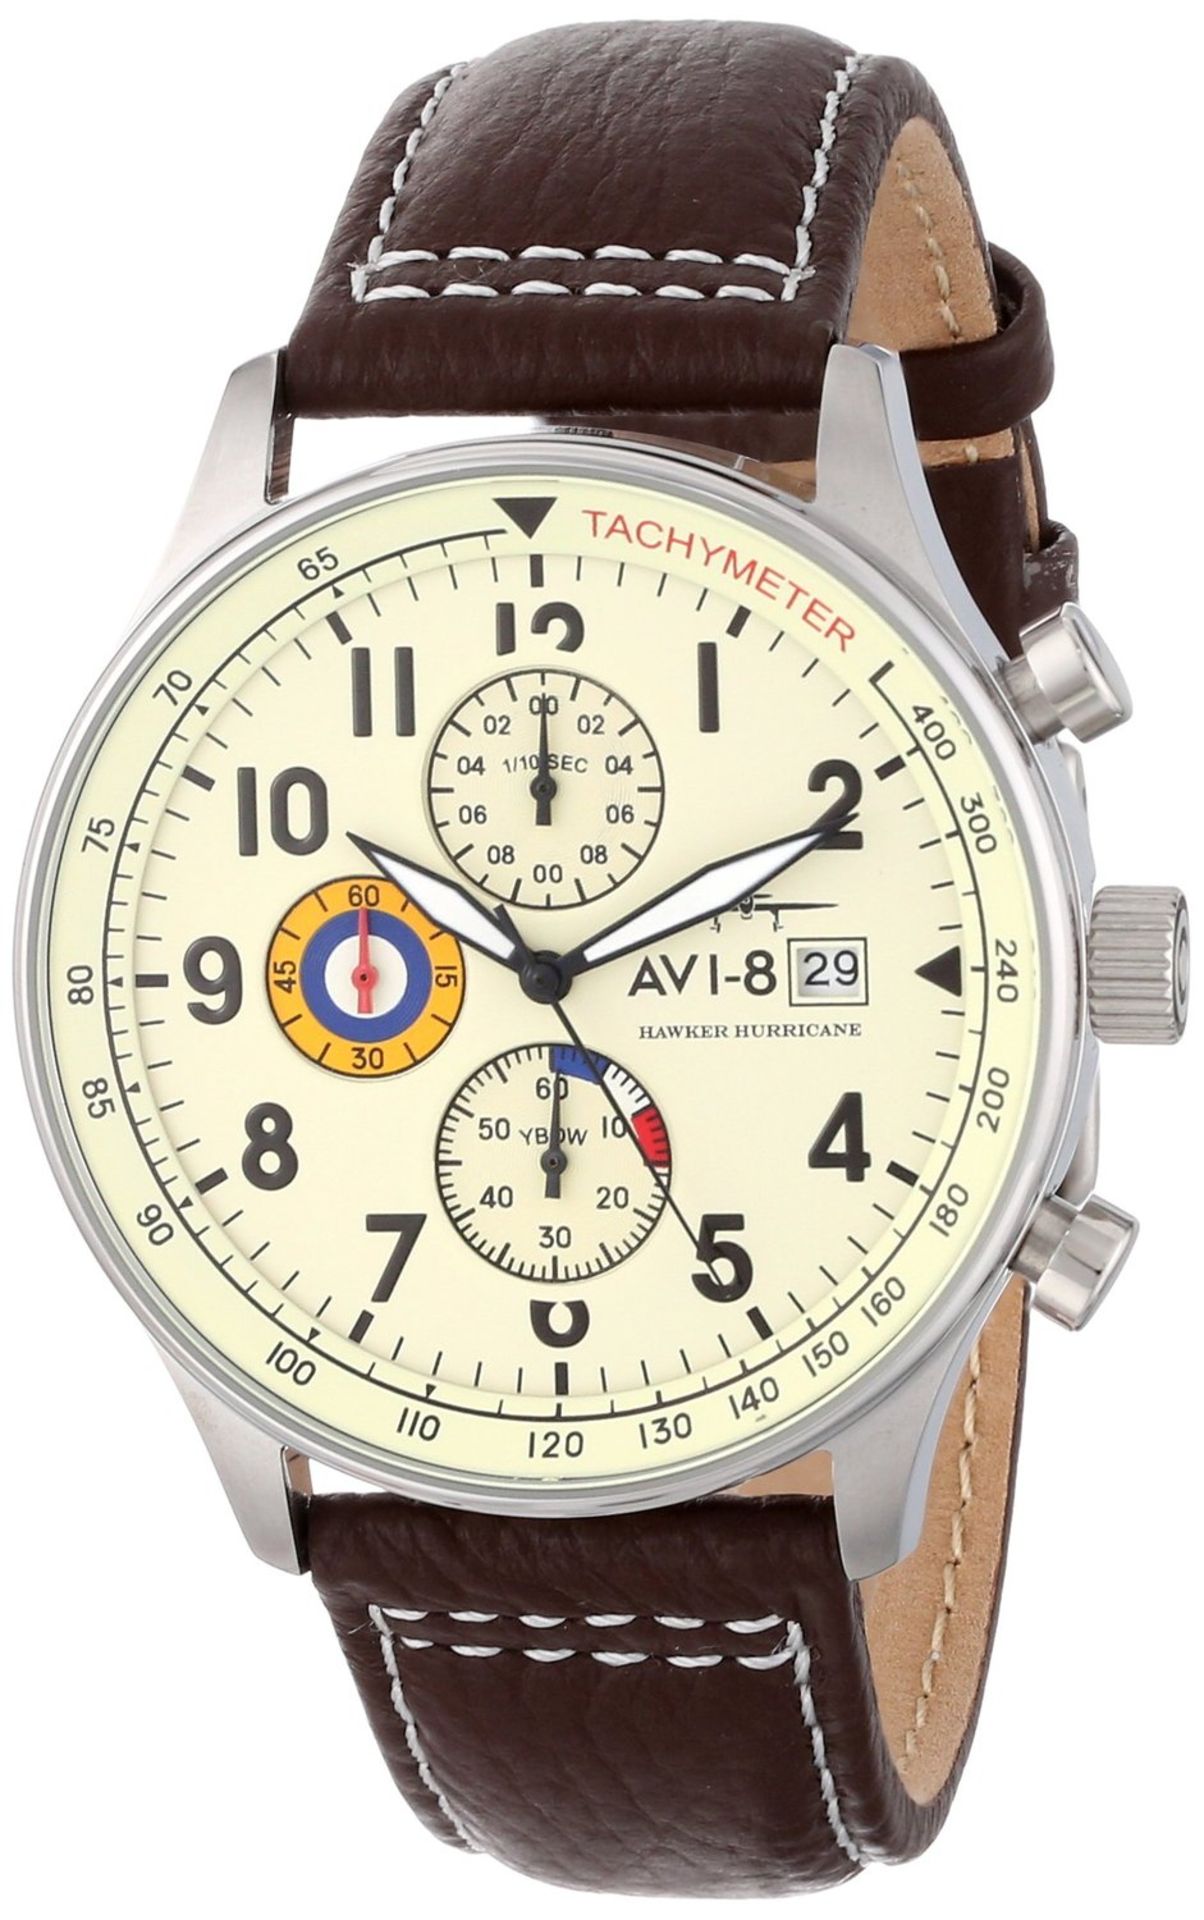 AVI-8 Men's AV-4011-04 "Hawker Hurricane" Stainless Steel Watch with Leather Band – BRAND NEW, BOXED